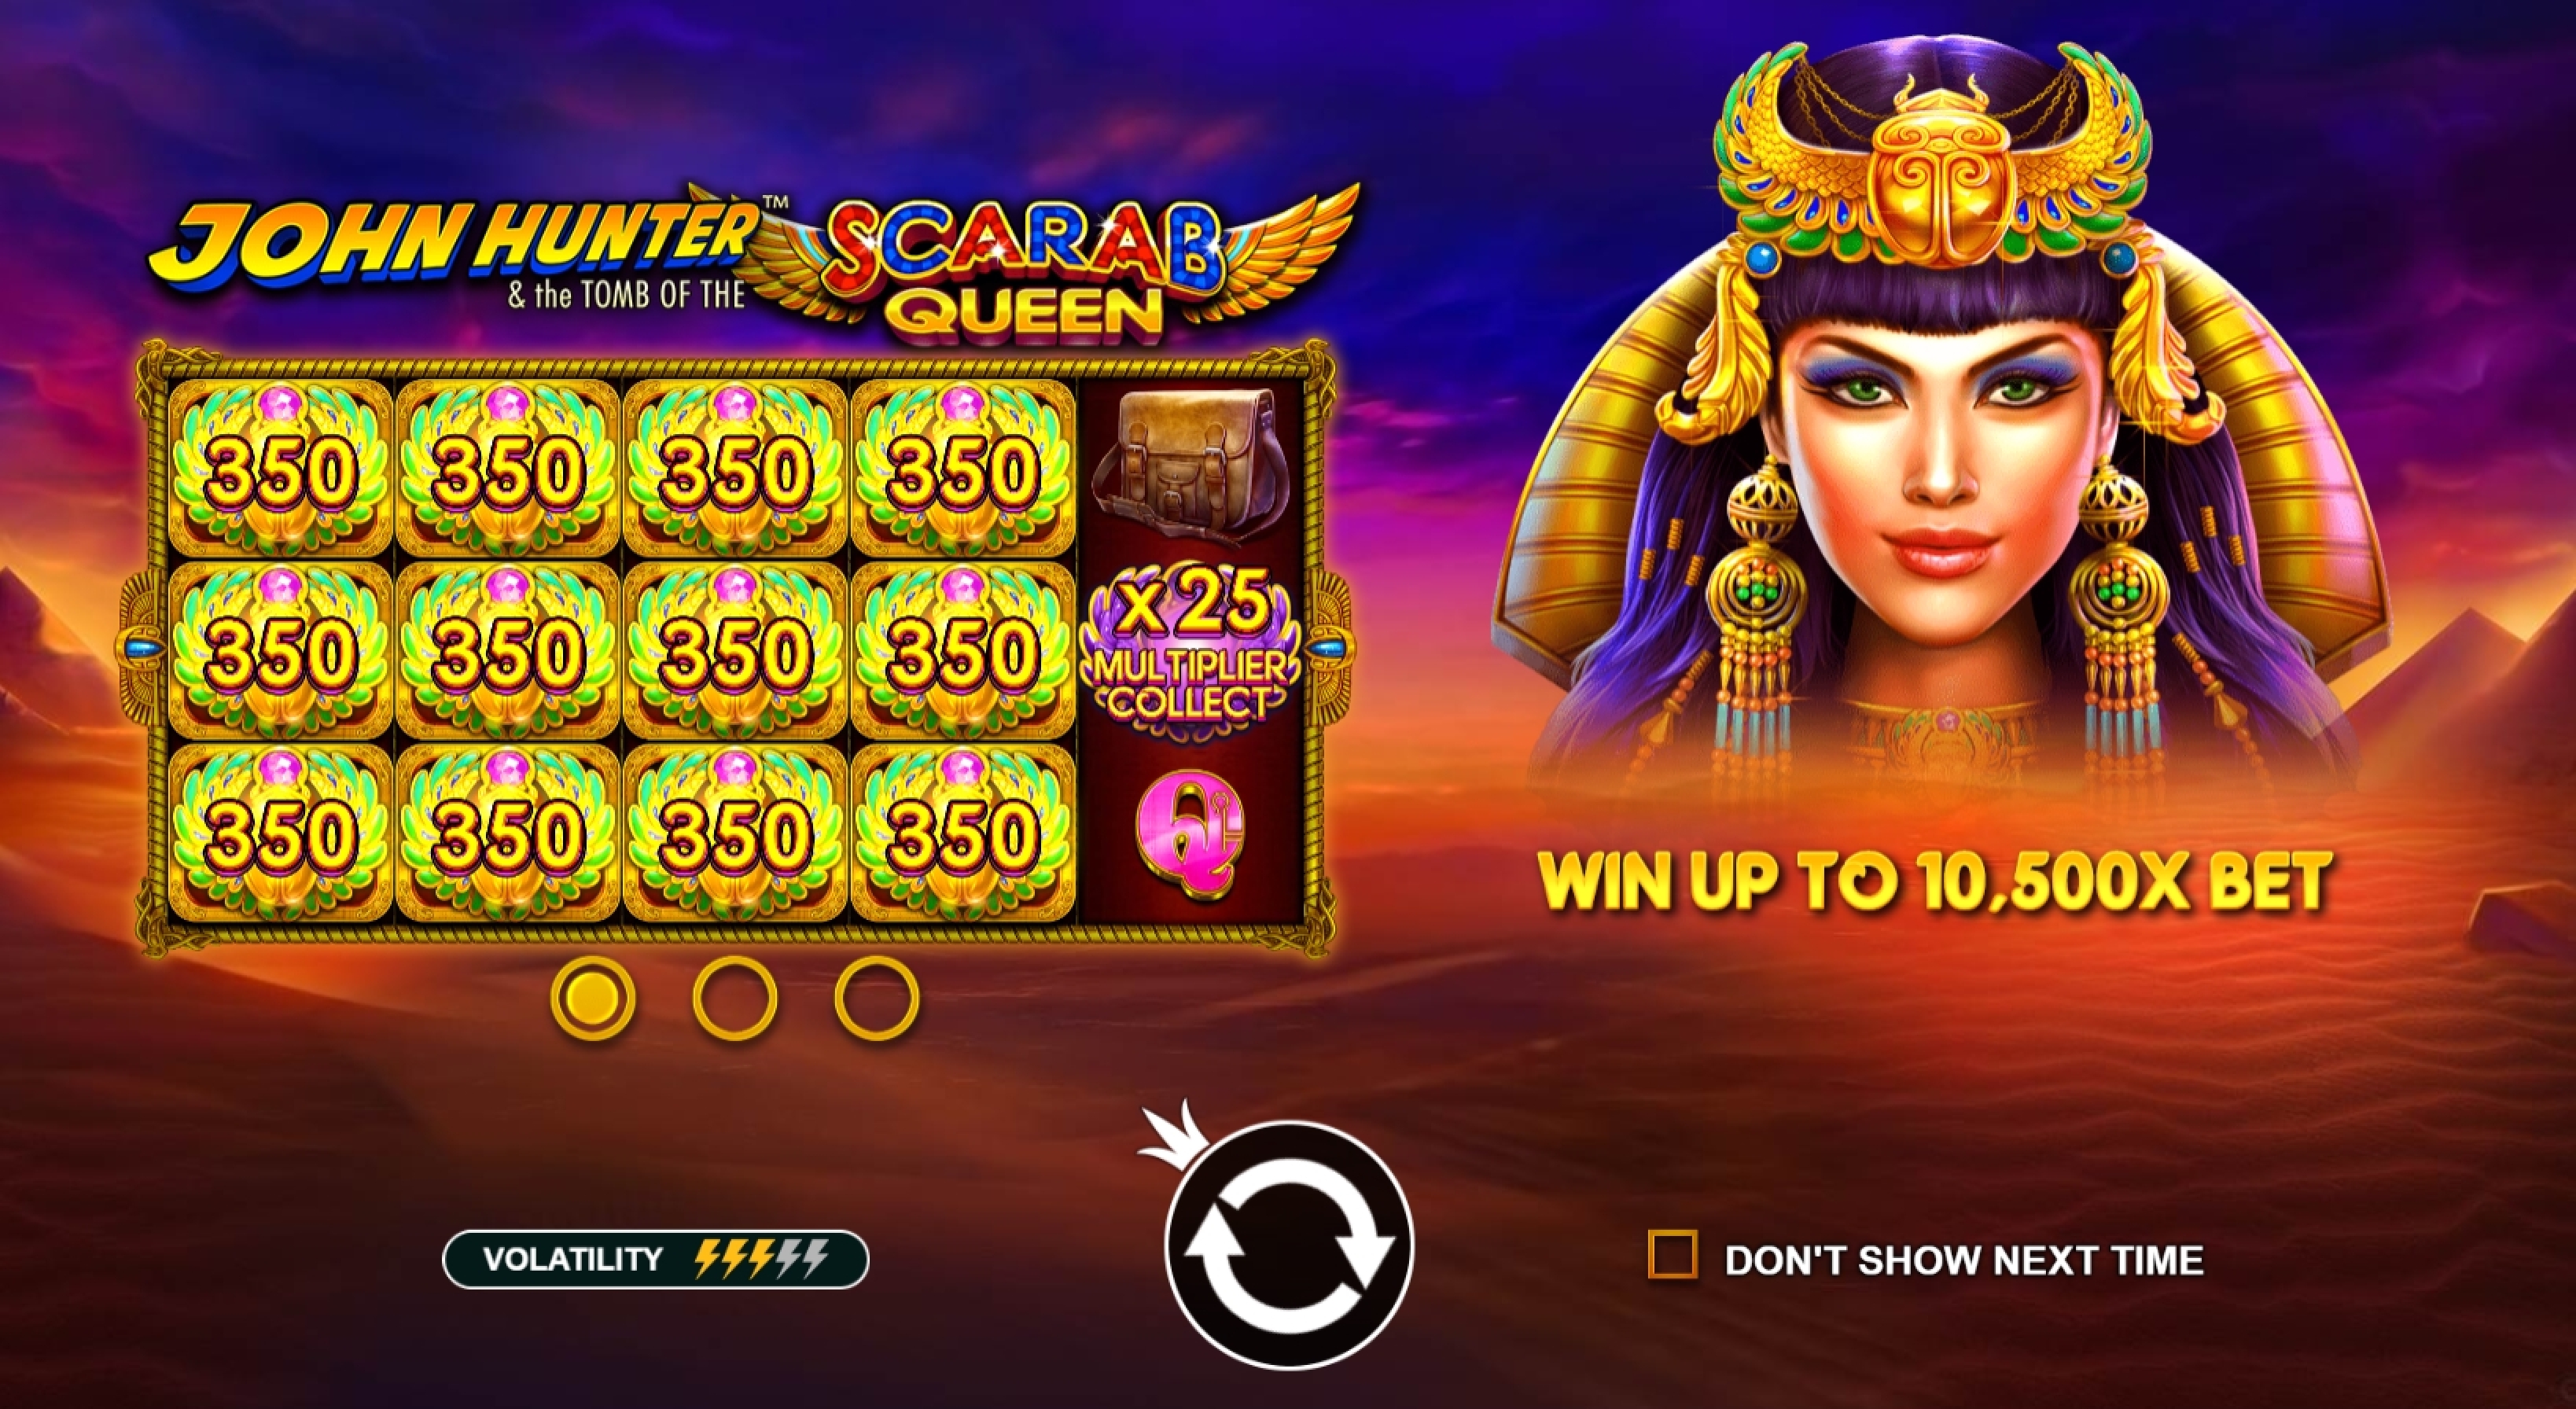 Play John Hunter Tomb of the Scarab Queen Free Casino Slot Game by Pragmatic Play